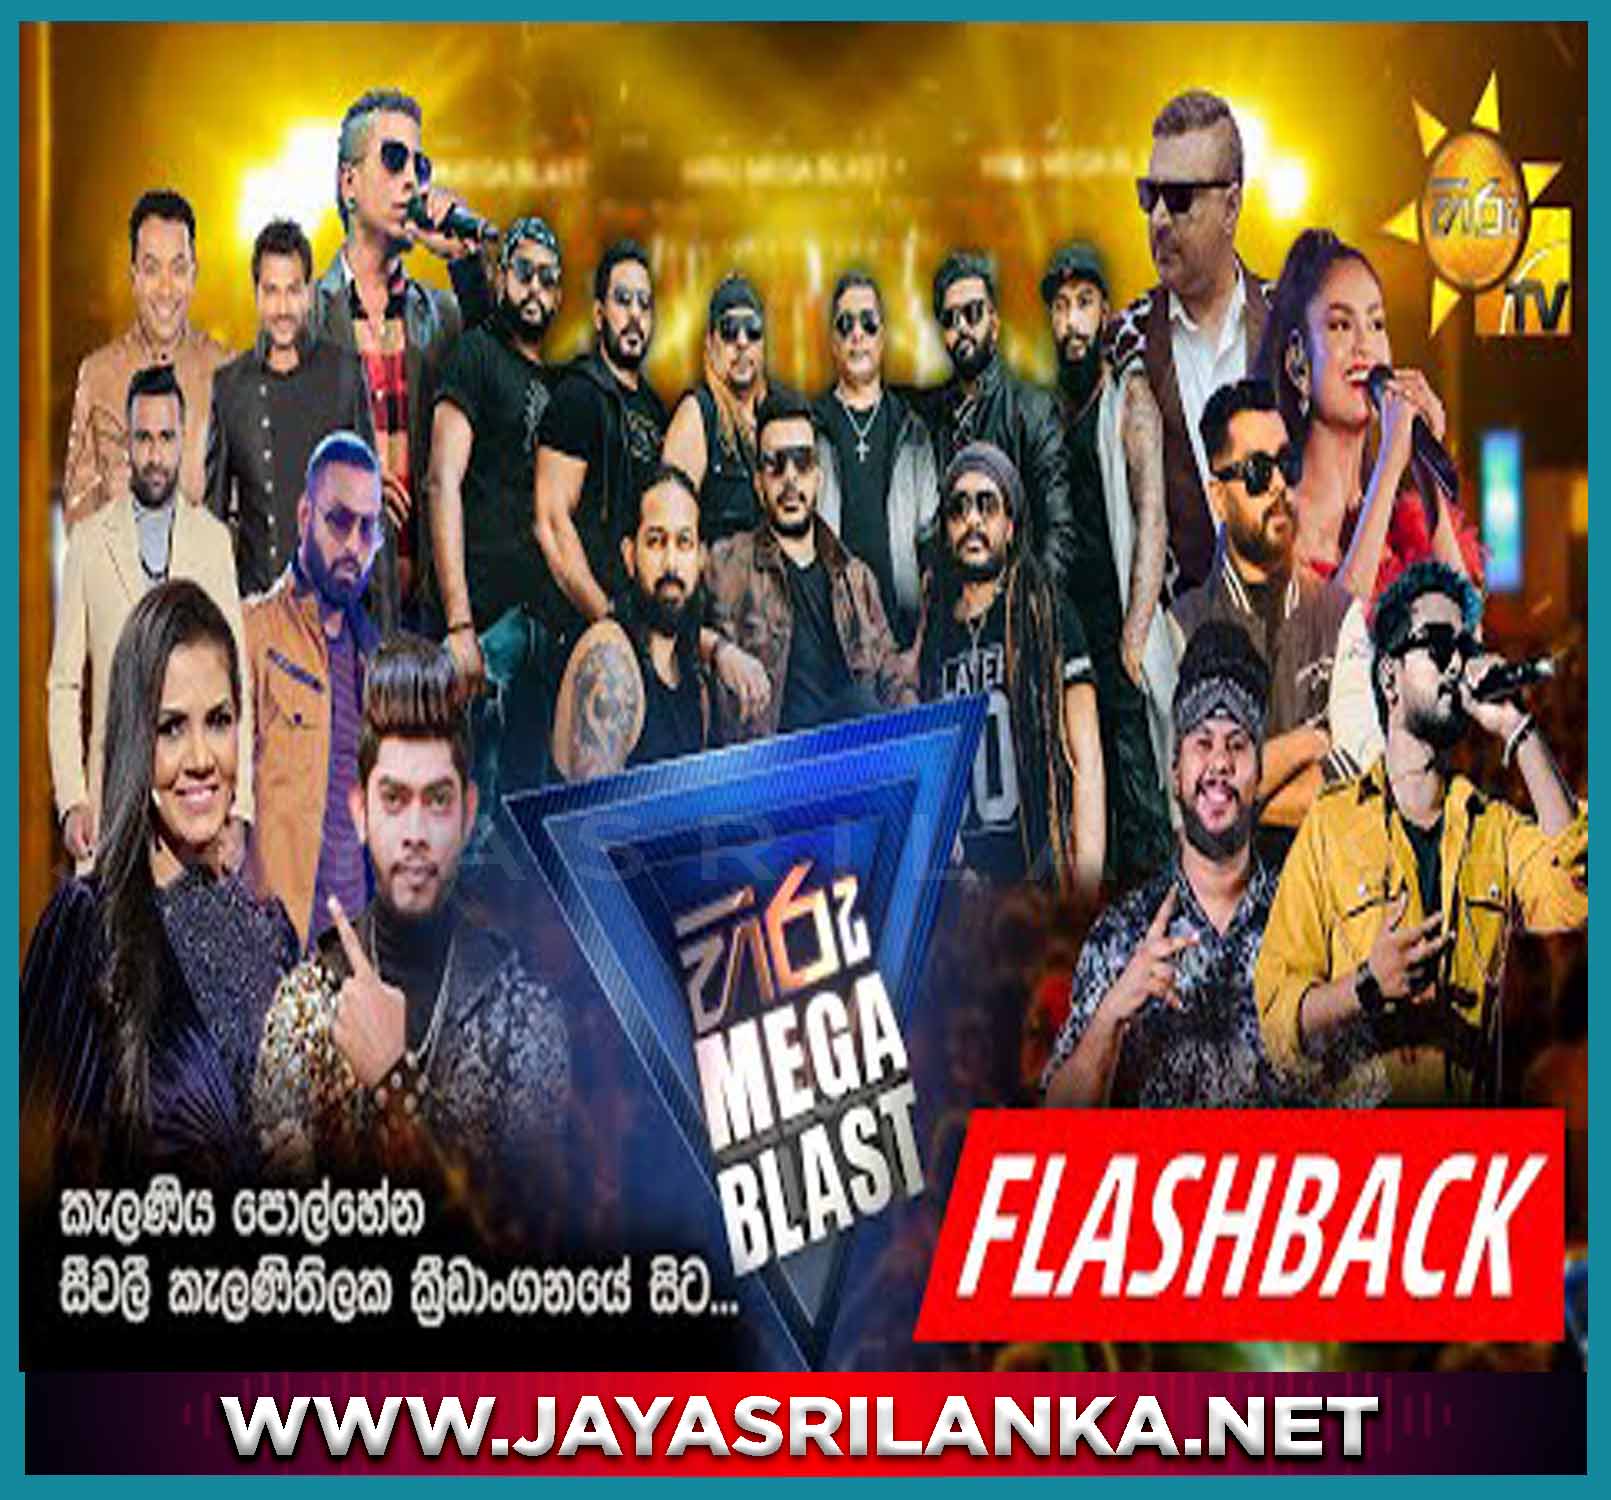 Hit Mix Songs Nonstop - Flash Back Mp3 Image